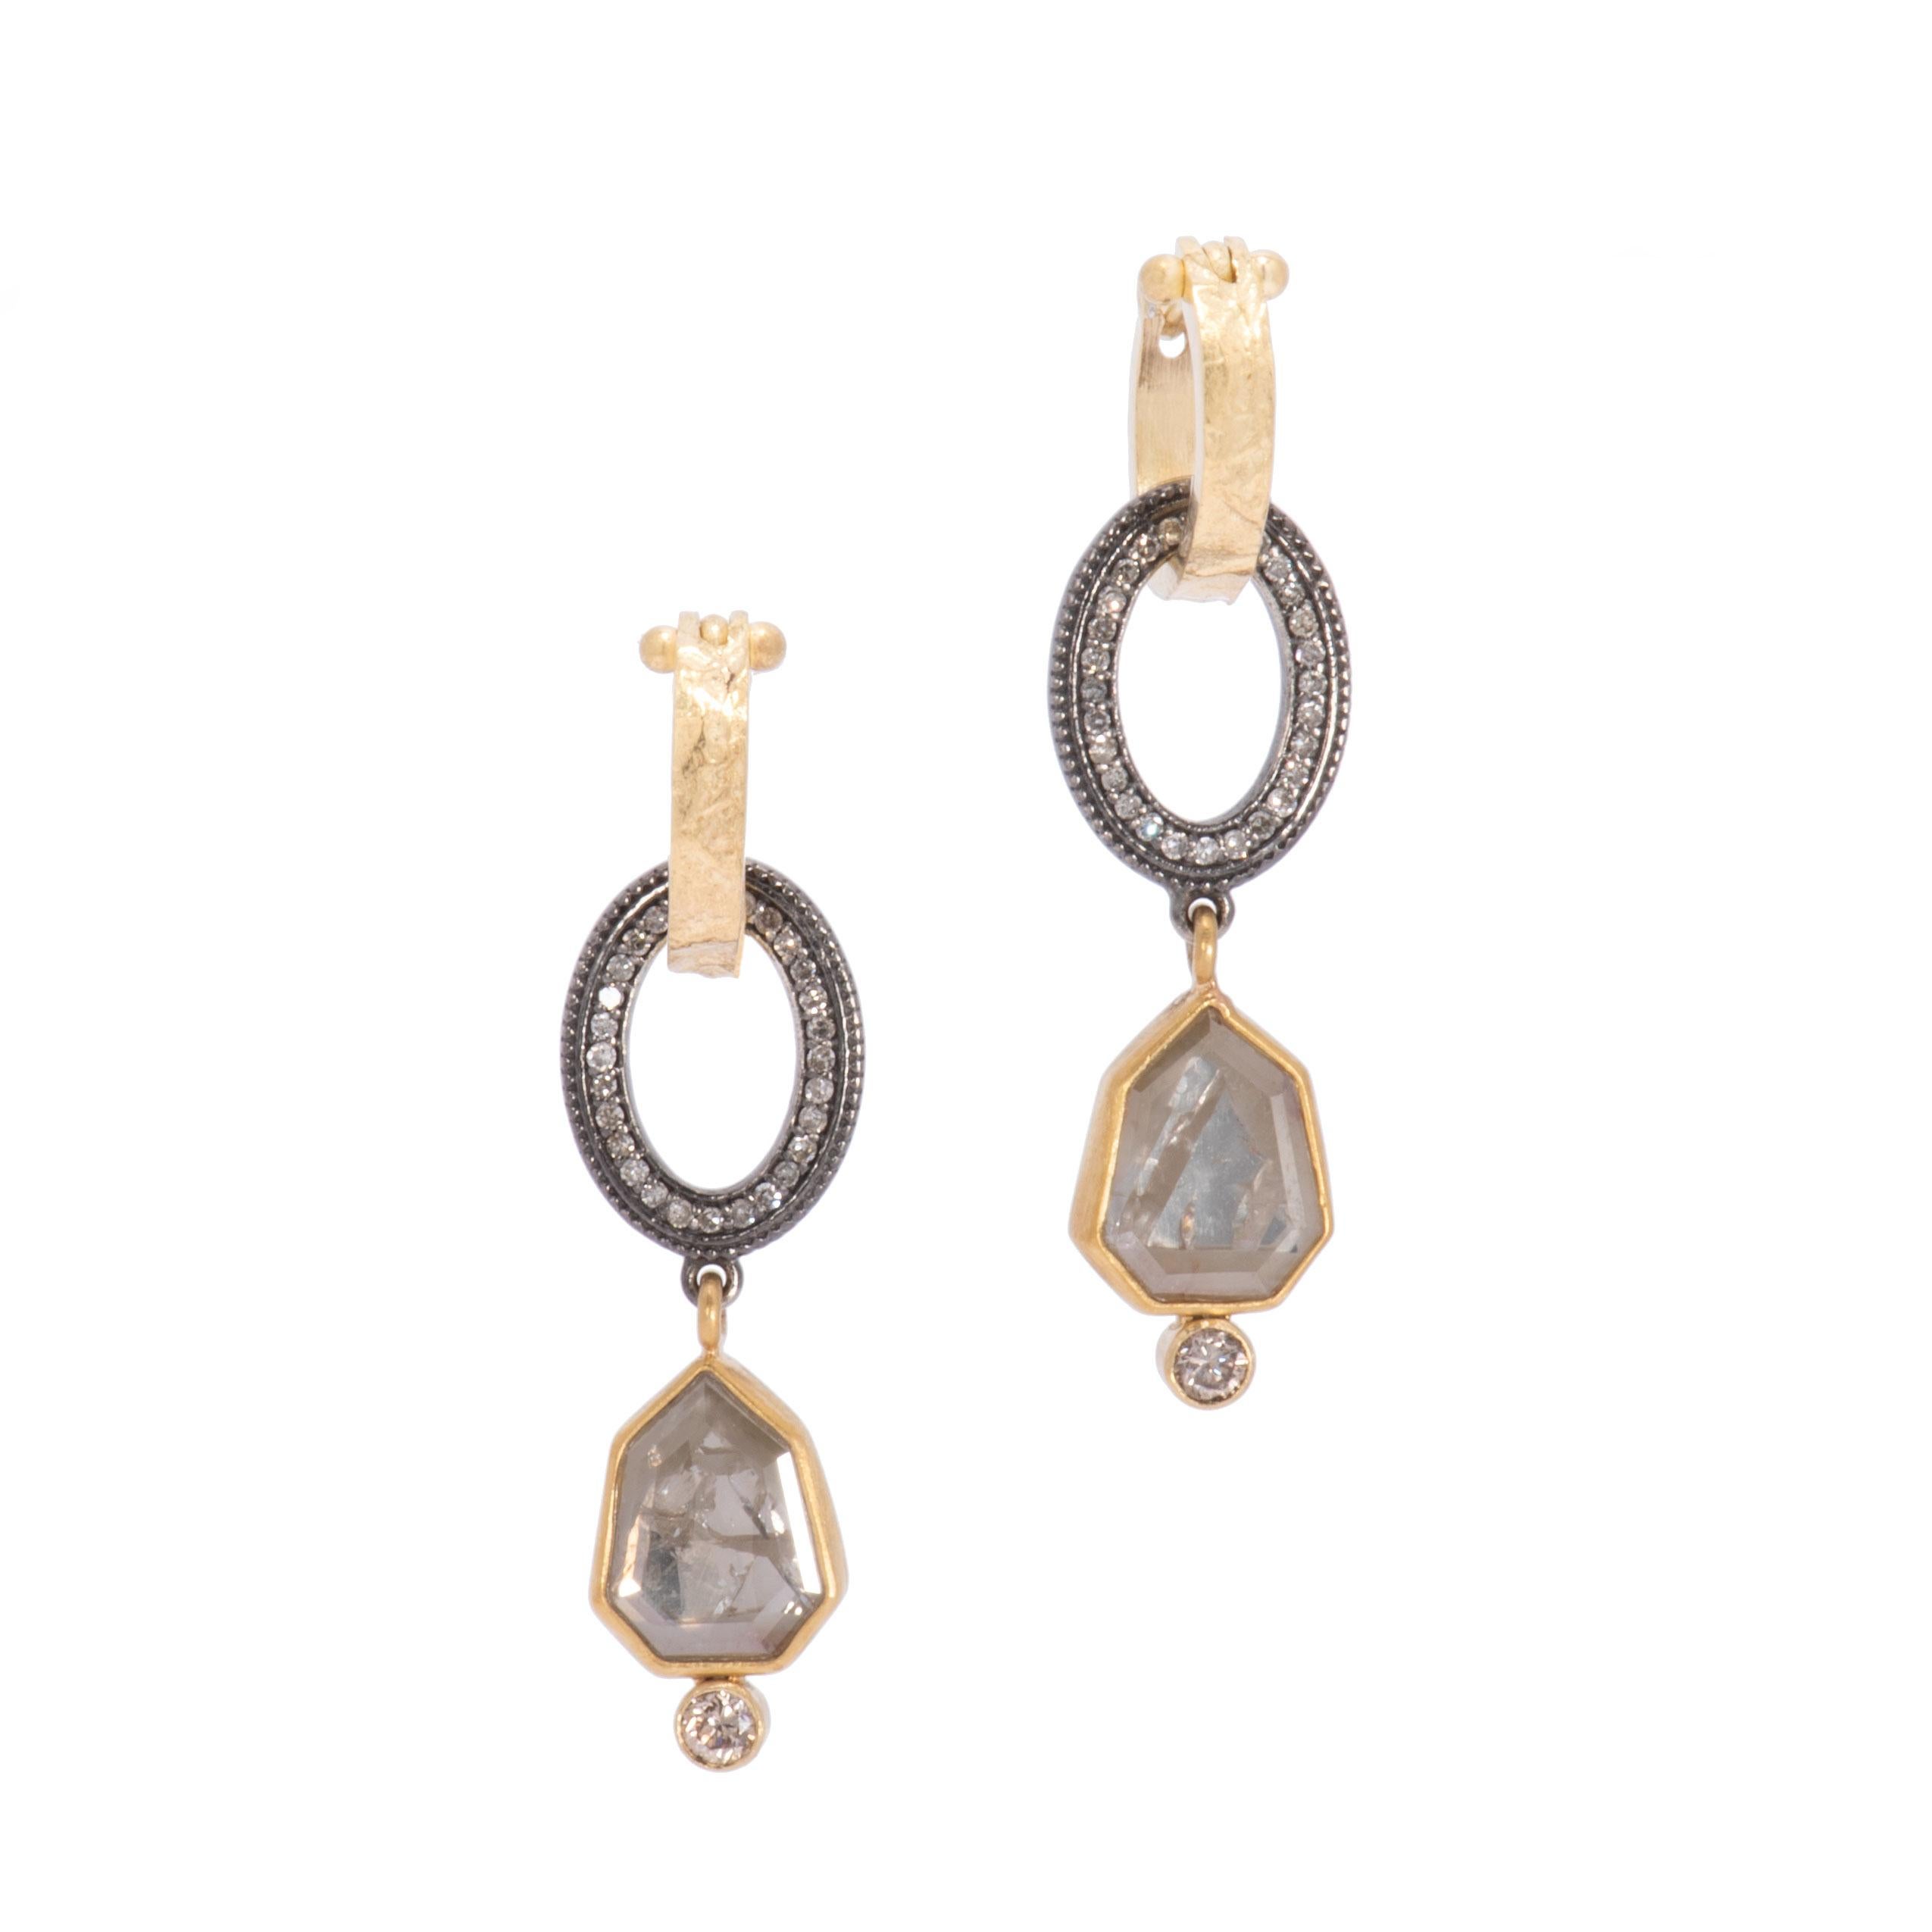 Silver-grey rose cut Grey Diamonds 3.77 tcw flash like vintage mirrors in a Tuscan villa. Cognac diamond points .22 tcw glimmer below and all are hung from oxidized sterling silver ovals set with shining pave white diamonds. Bezel set in 18 karat